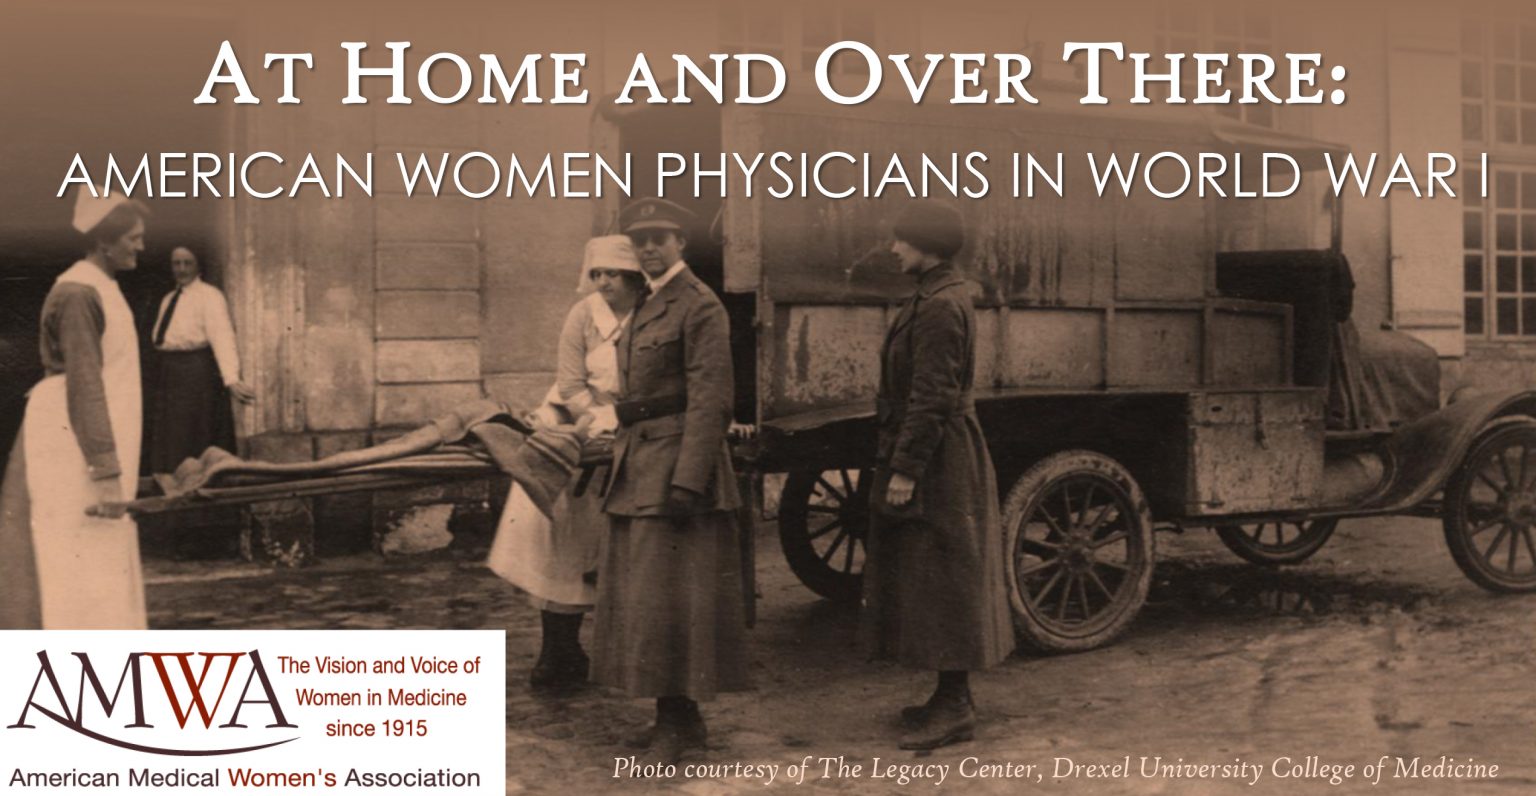 At Home and Over There: American Women Physicians in World War I featured historical pictures and videos illustrating gender bias in medicine.